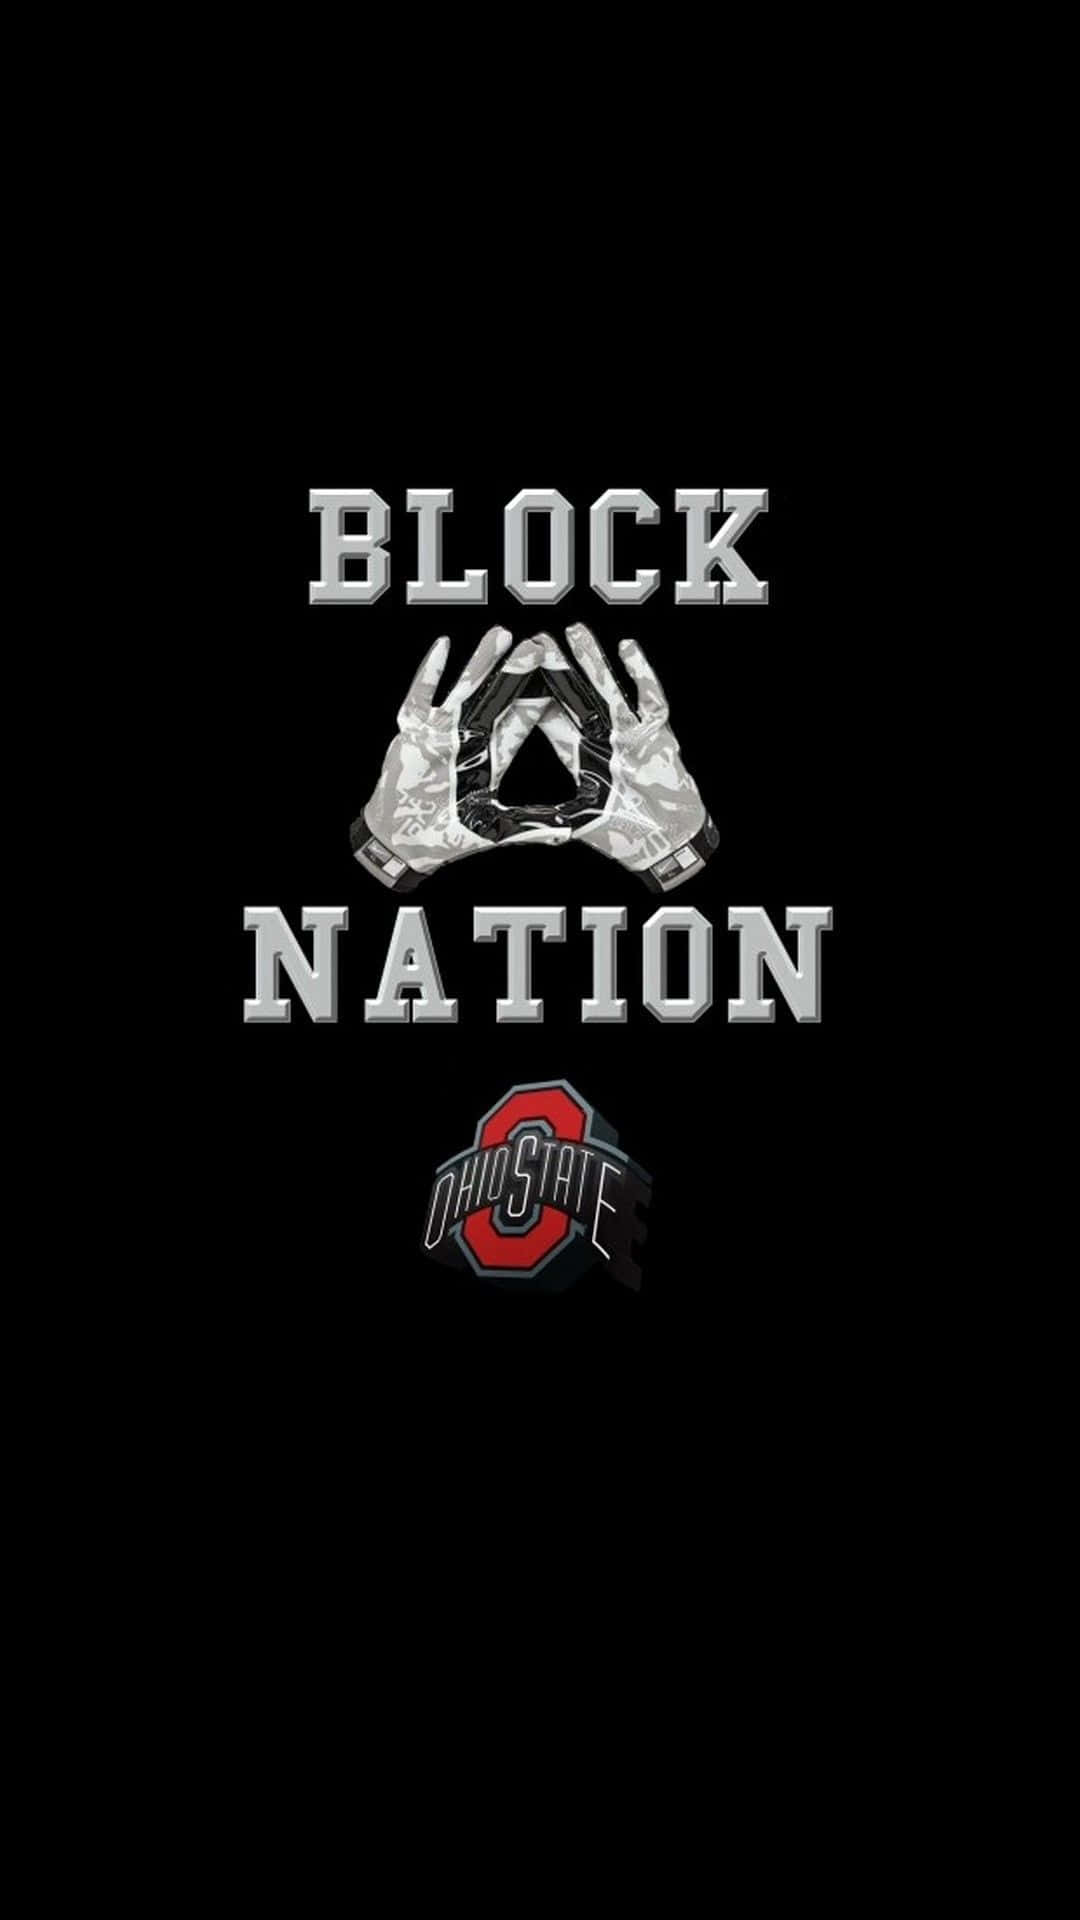 Ohio State Football Team Inspiration on an iPhone Background Wallpaper